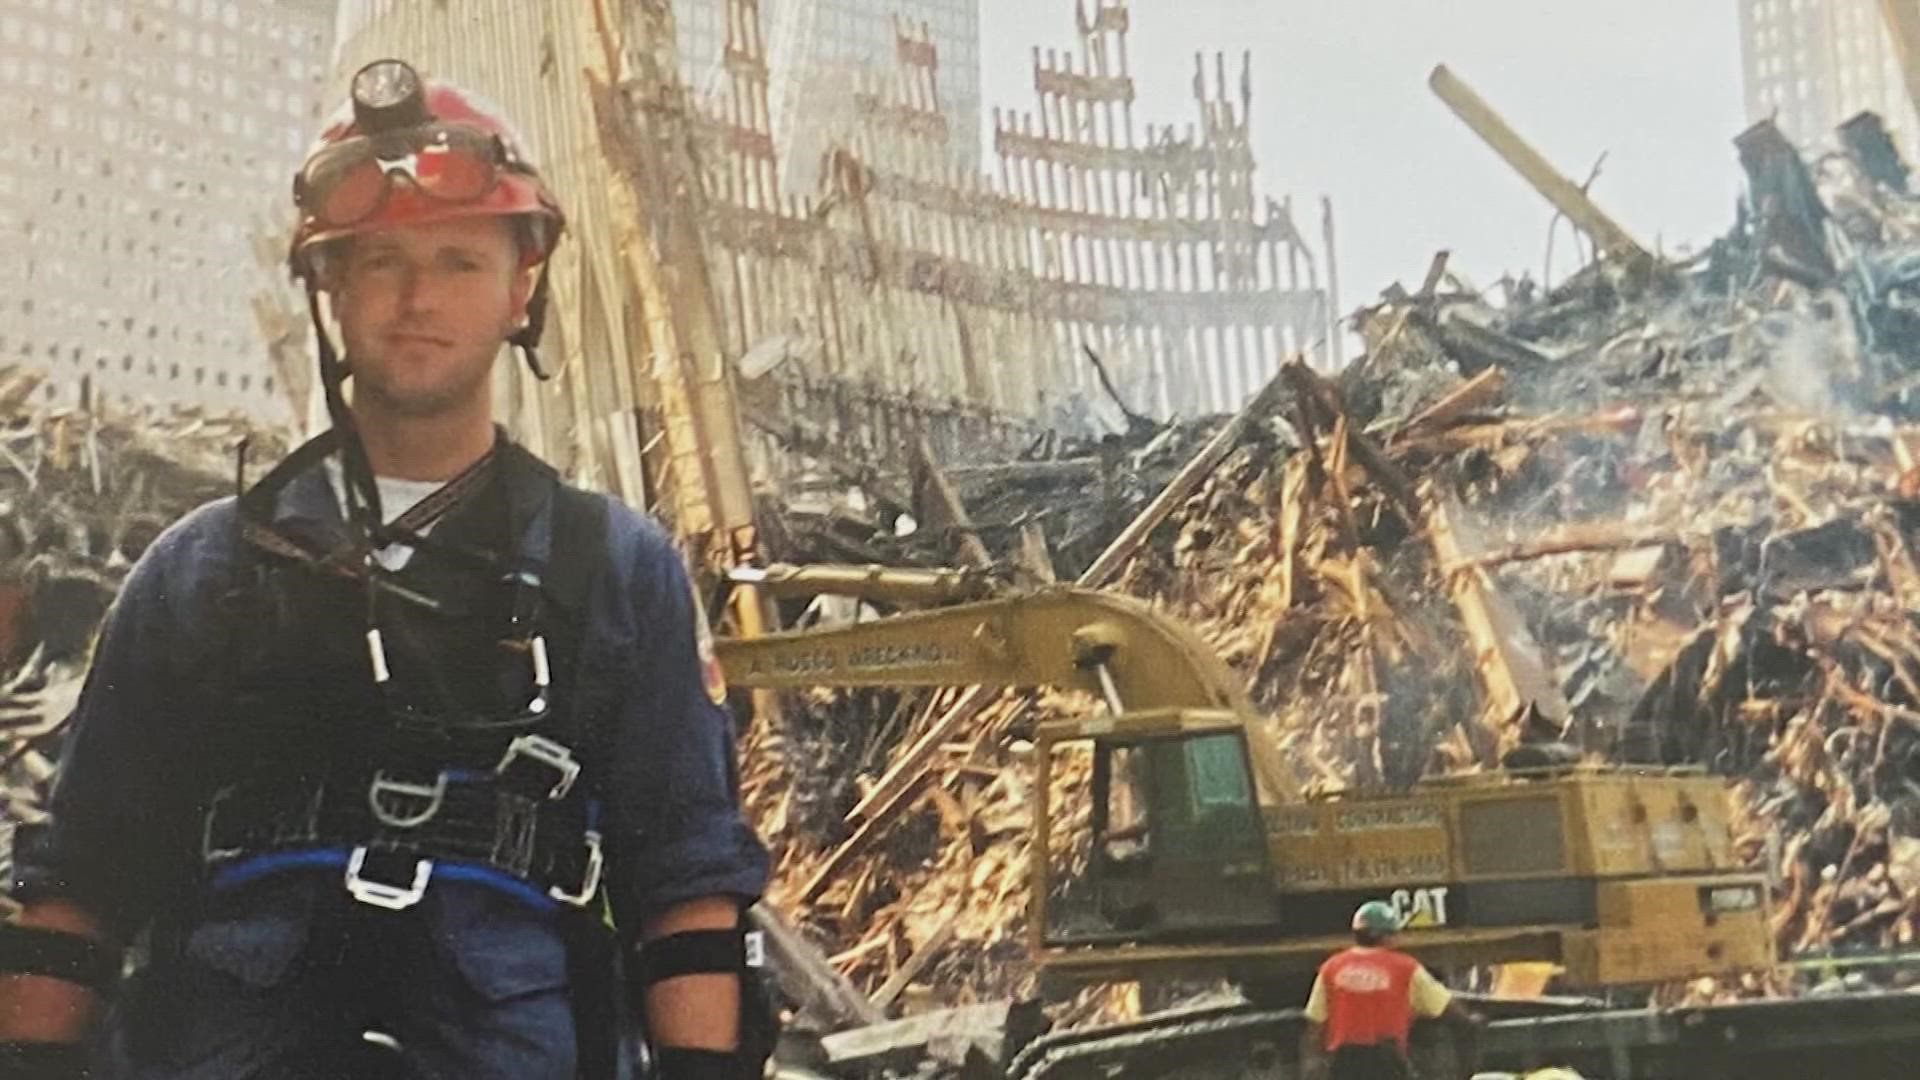 Stories from September 11th have stuck with us for so many years, but for one Sugar Land firefighter, the story he’ll always remember, is his own.